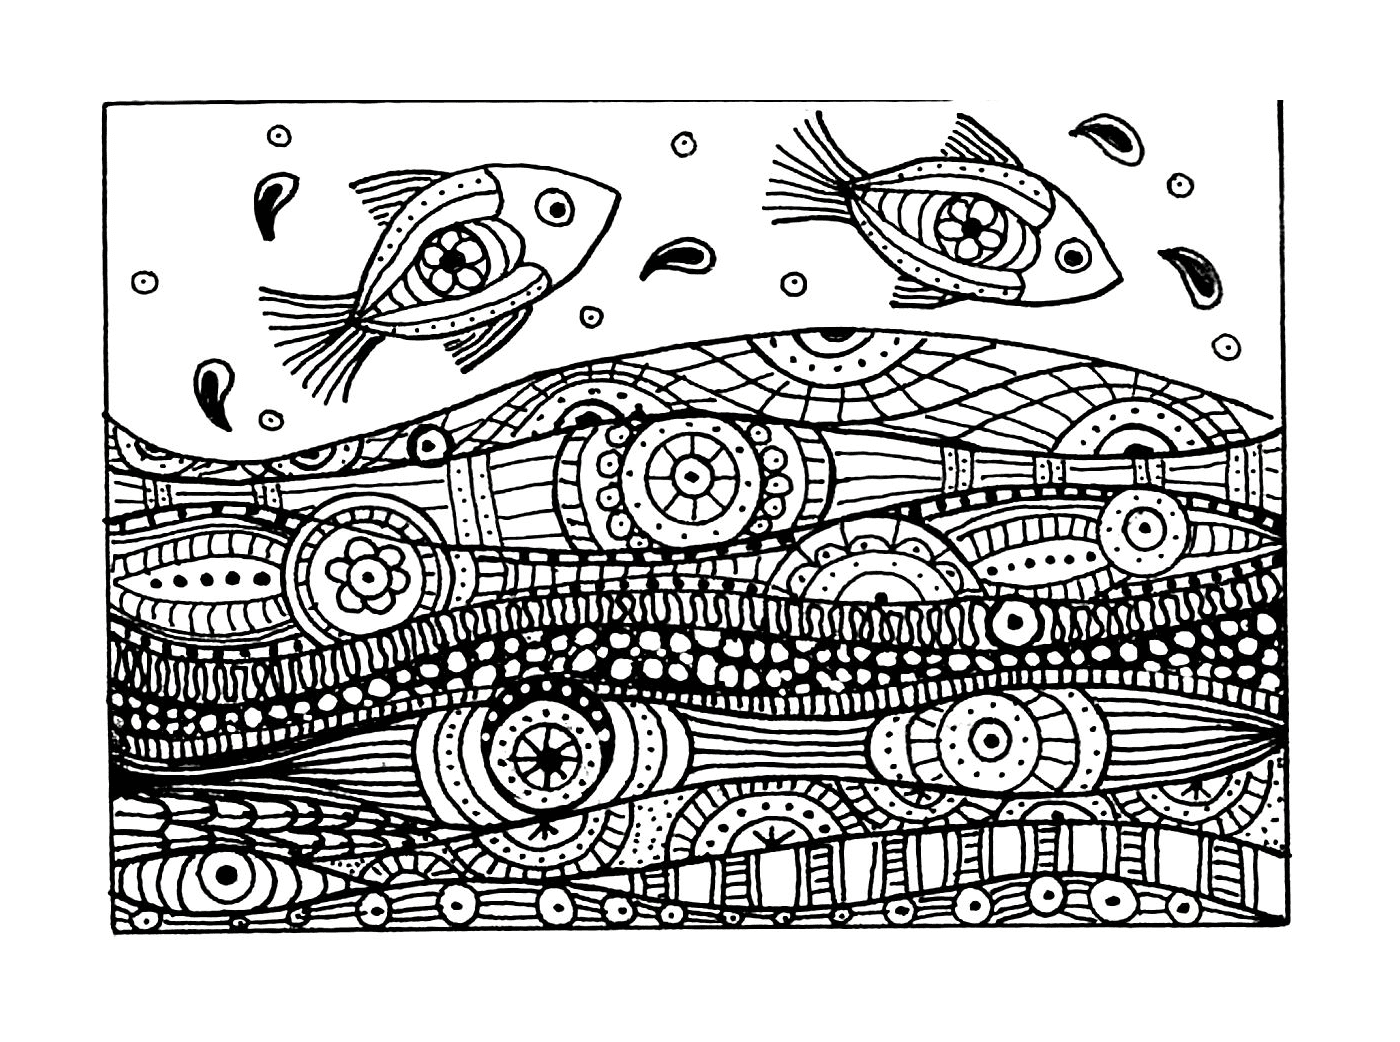  Fish with wavy patterns 